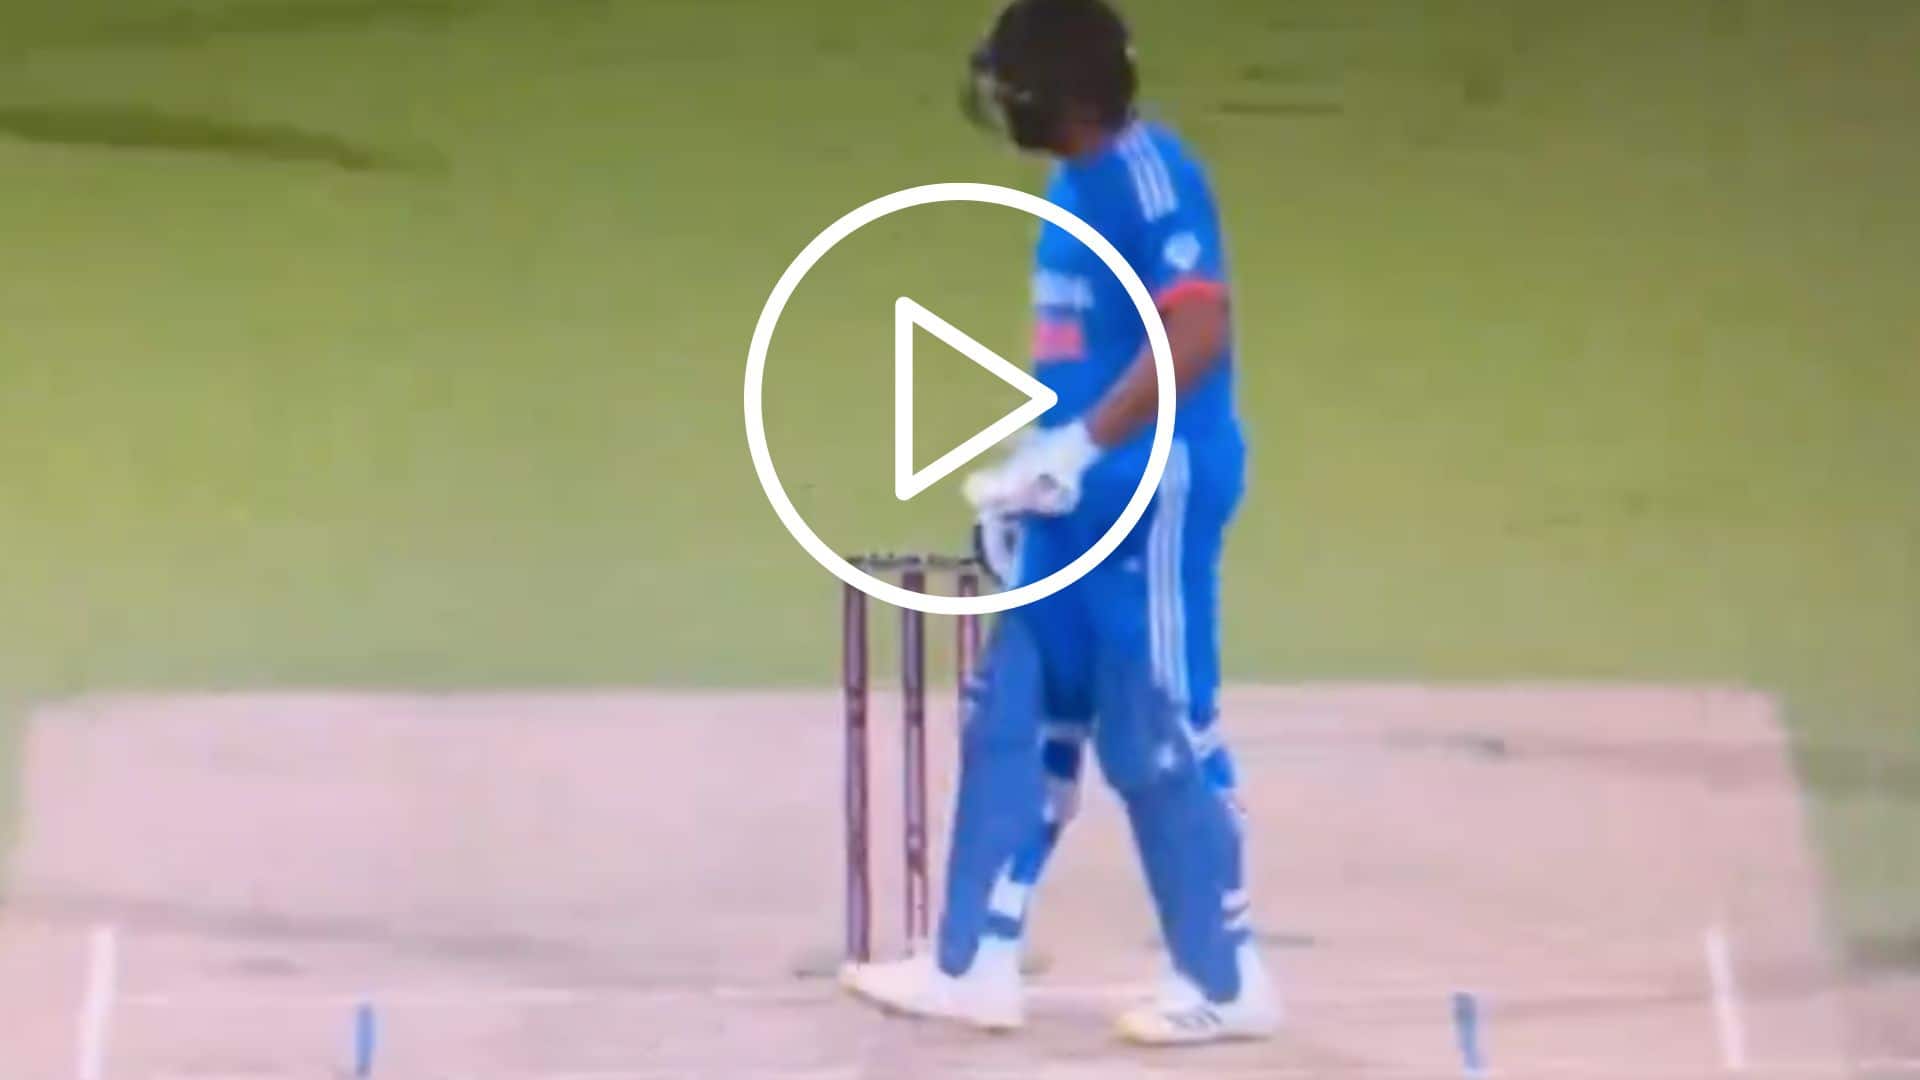 [Watch] ‘Pad Diya Kya?' - Rohit Sharma's 'Frustrated' Reaction On Umpire's Decision In IND-AFG T20I